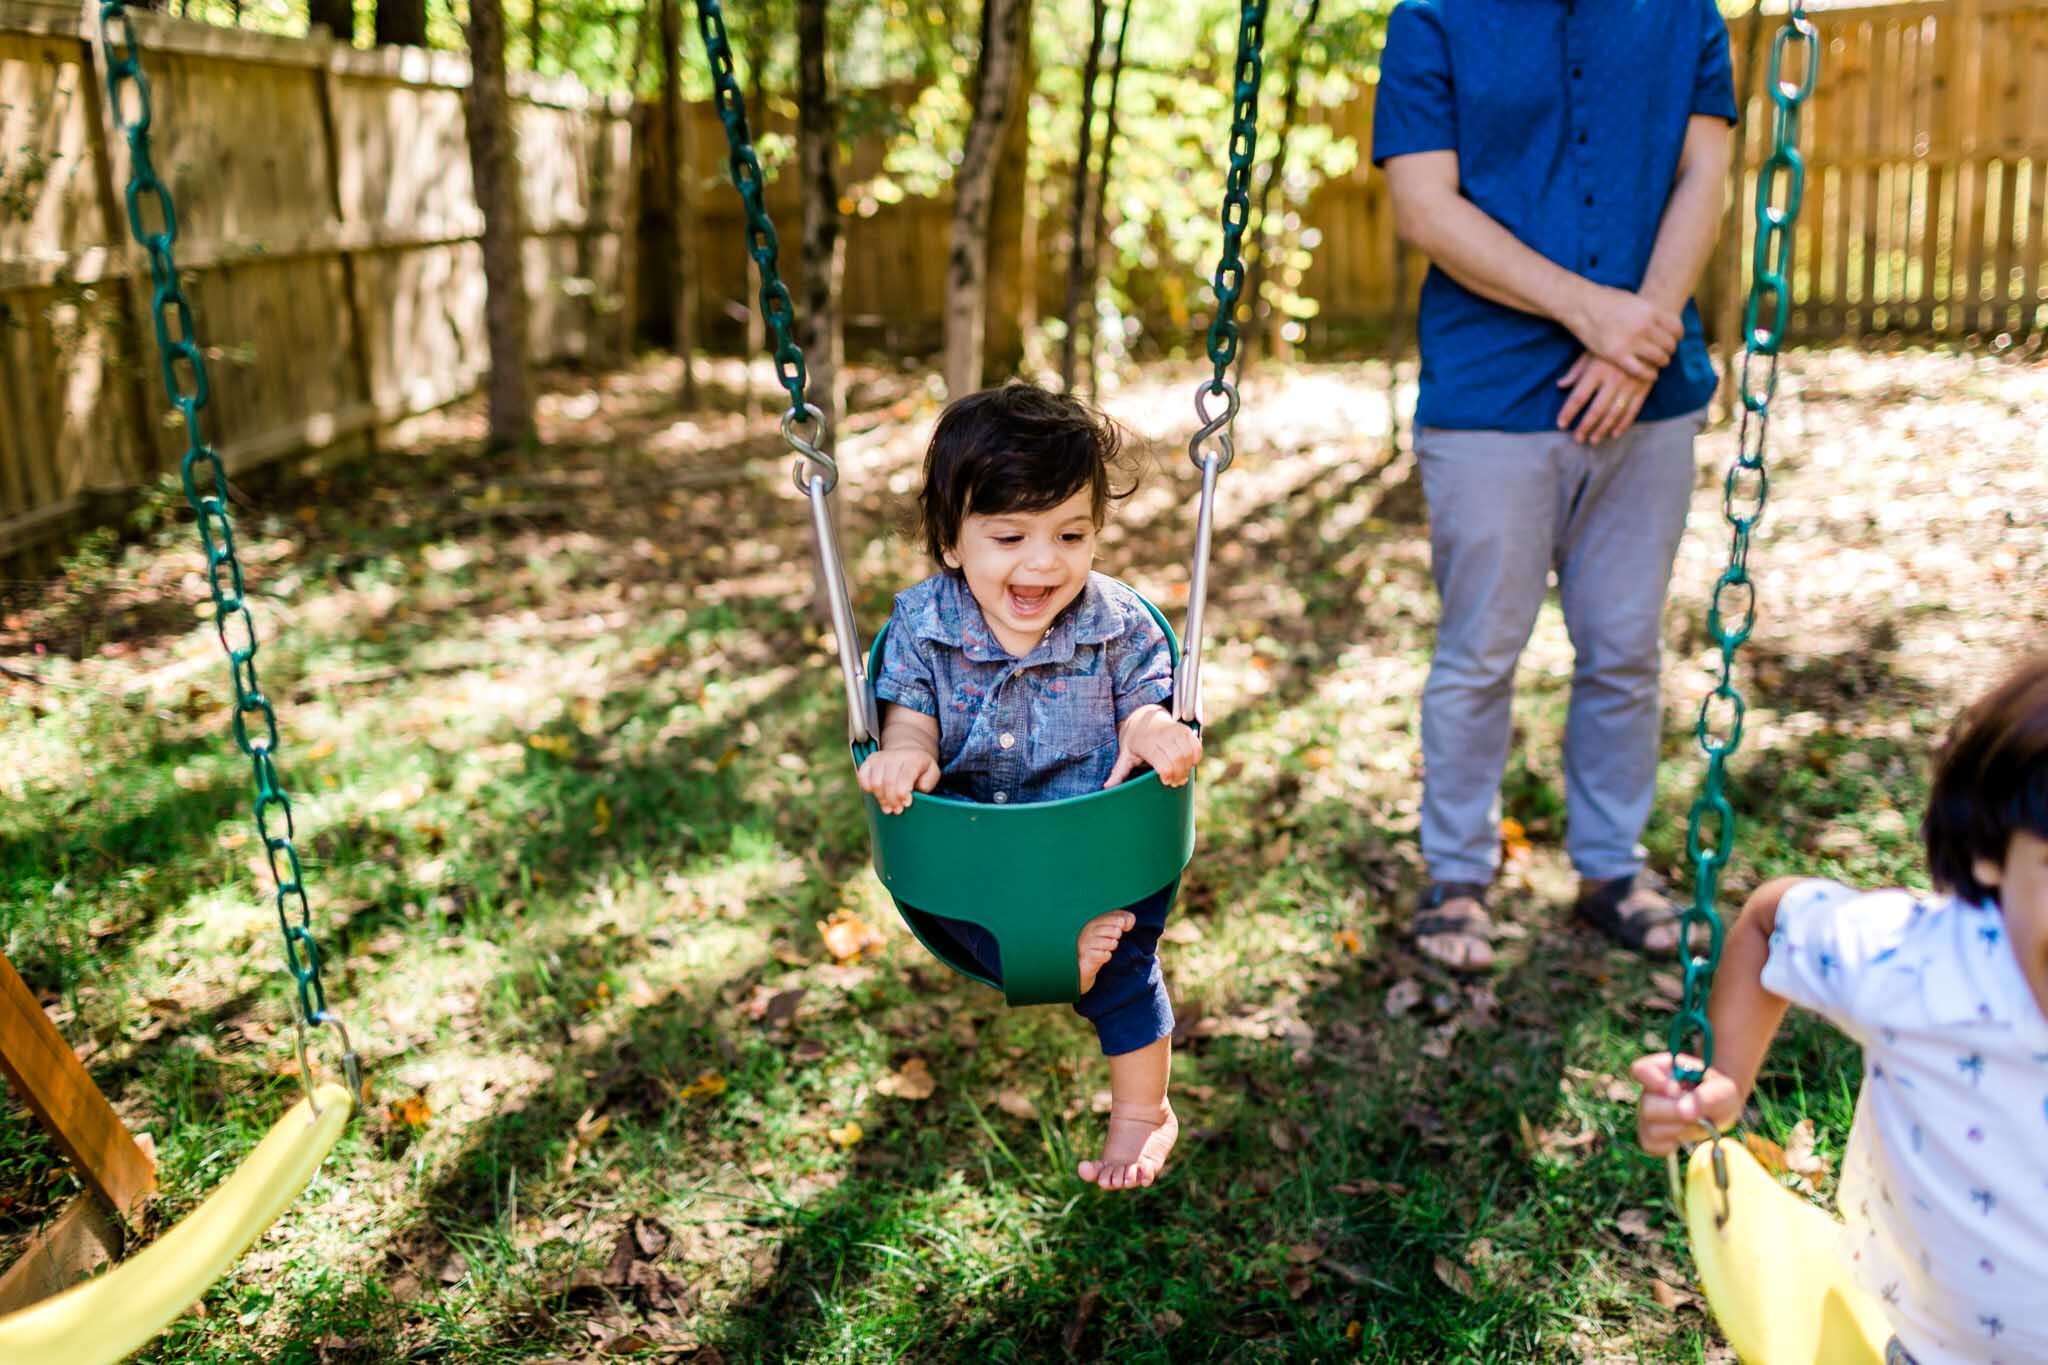 Durham Family Photographer | By G. Lin Photography | Lifestyle family photography | Candid photo of boy on swing